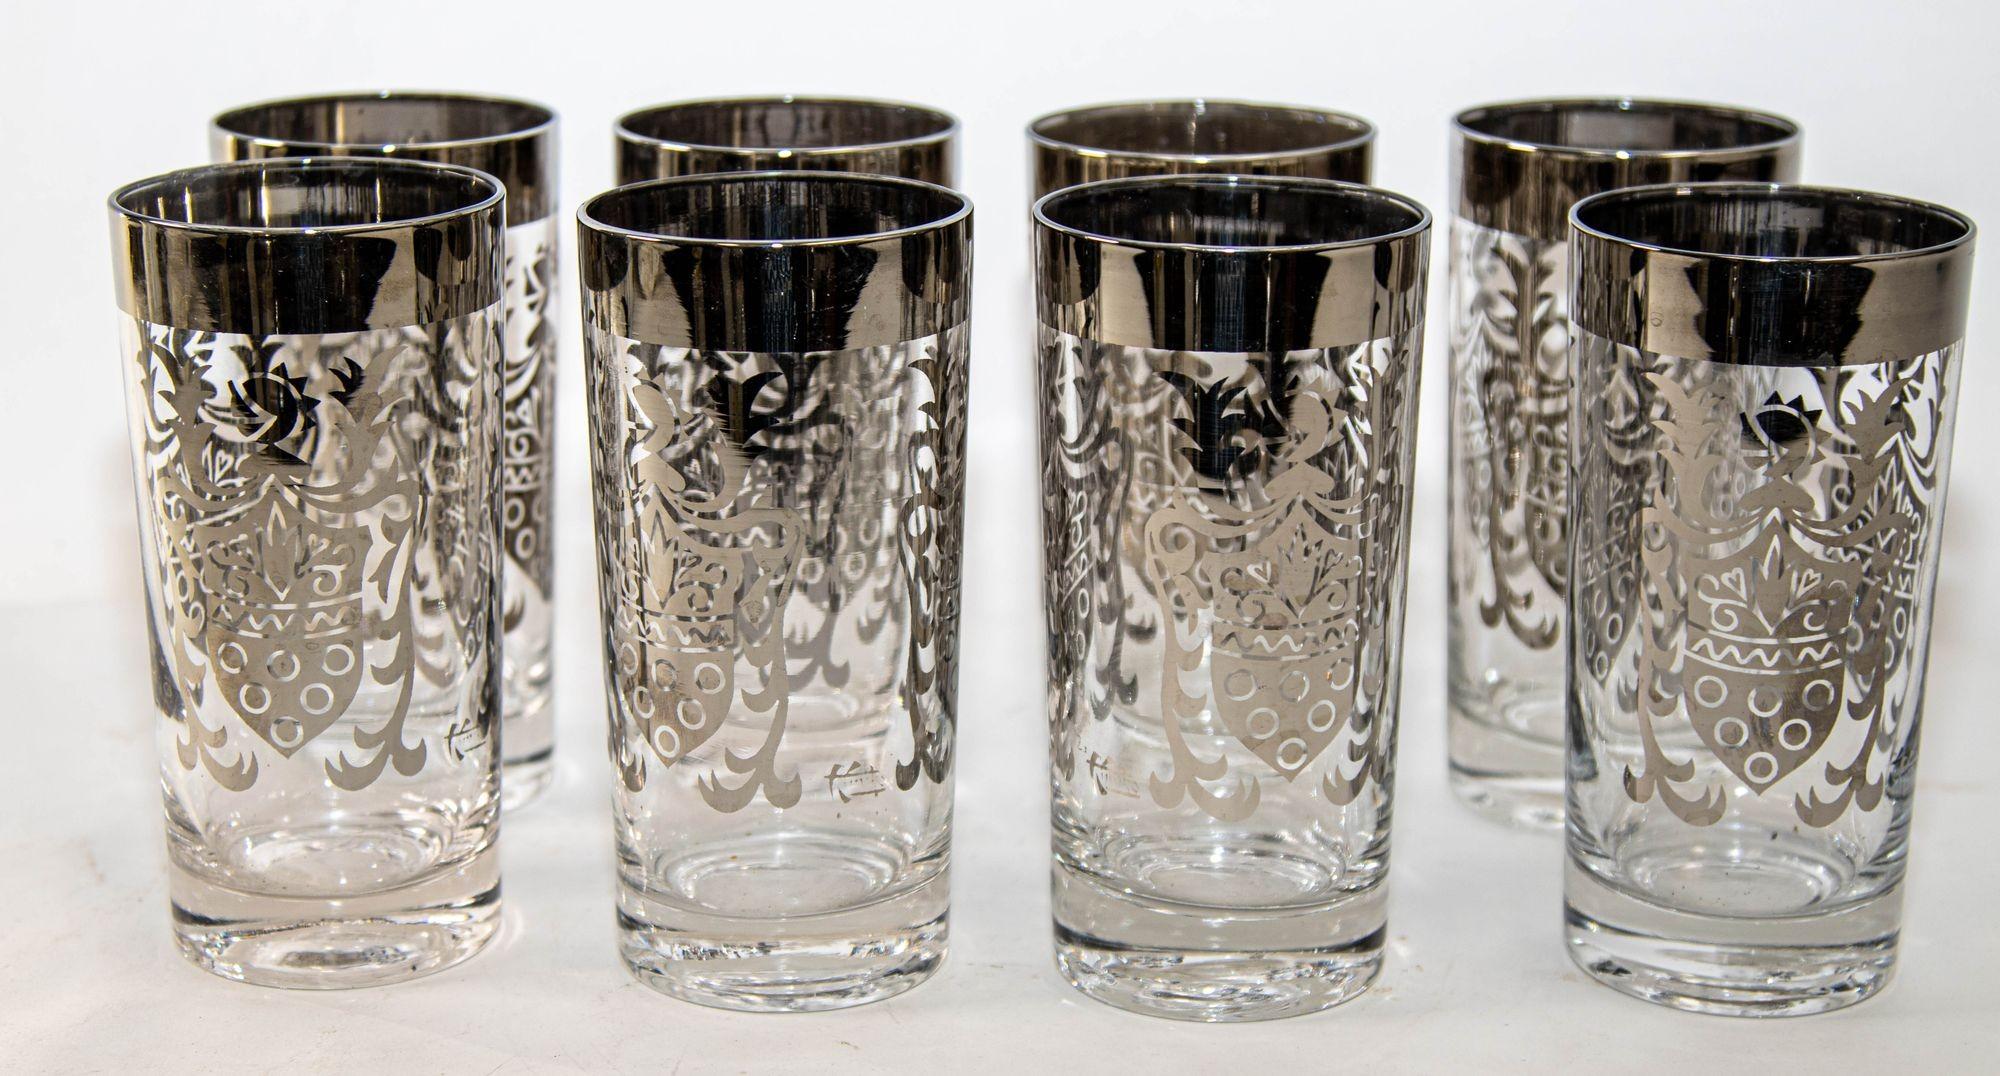 Vintage Set of 8 Kimiko highball glasses from the 1960s, featuring a silver band and a shield crest accent.
The tumbler glasses come with a carrying storage caddy.
Set of 8 Vintage Mid-Century Kimiko highball glasses, each signed and featuring a